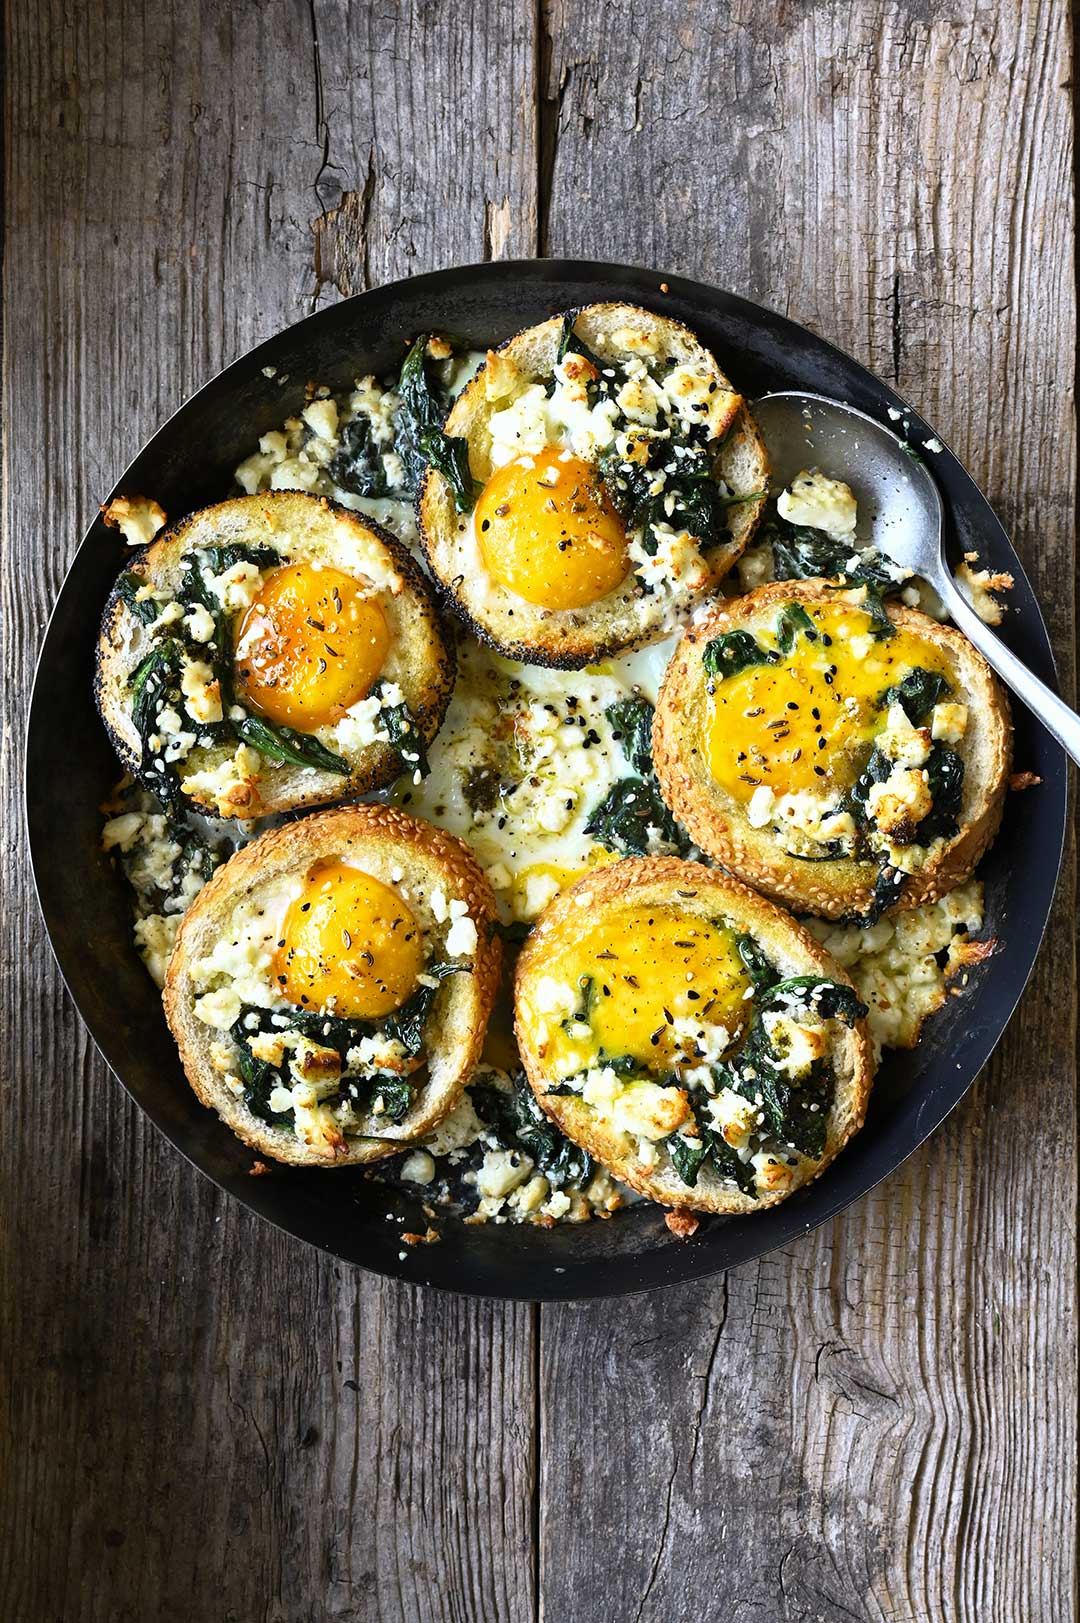 serving dumplings | Baked za'atar egg buns with spinach and feta